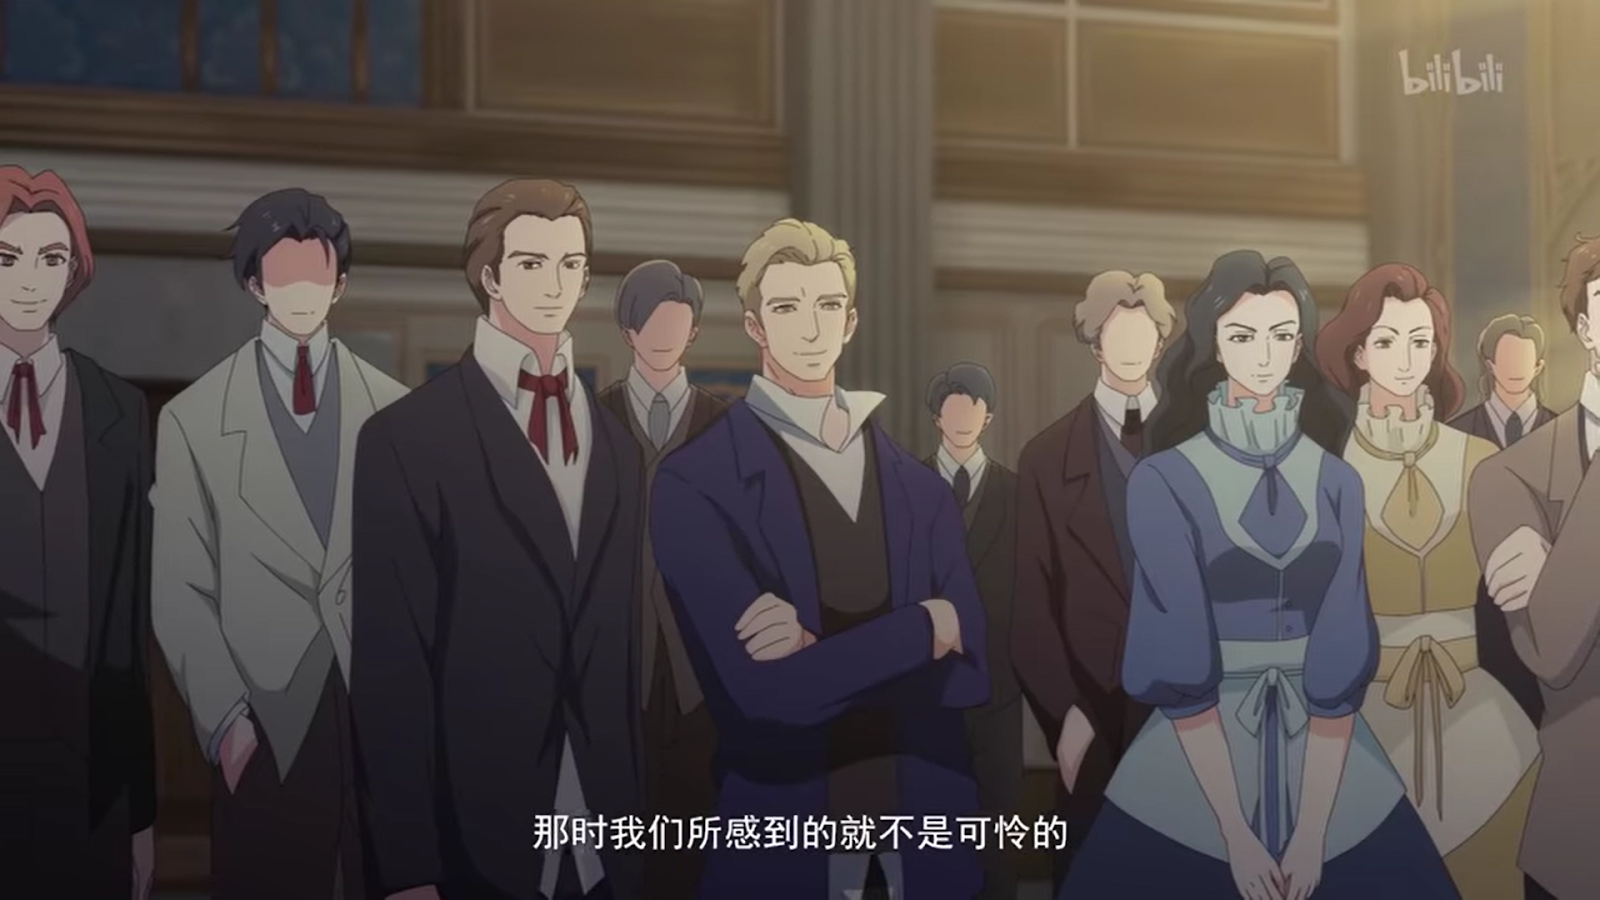 Politics In Media The Karl Marx Anime made the by Chinese Government The  Leader  YouTube